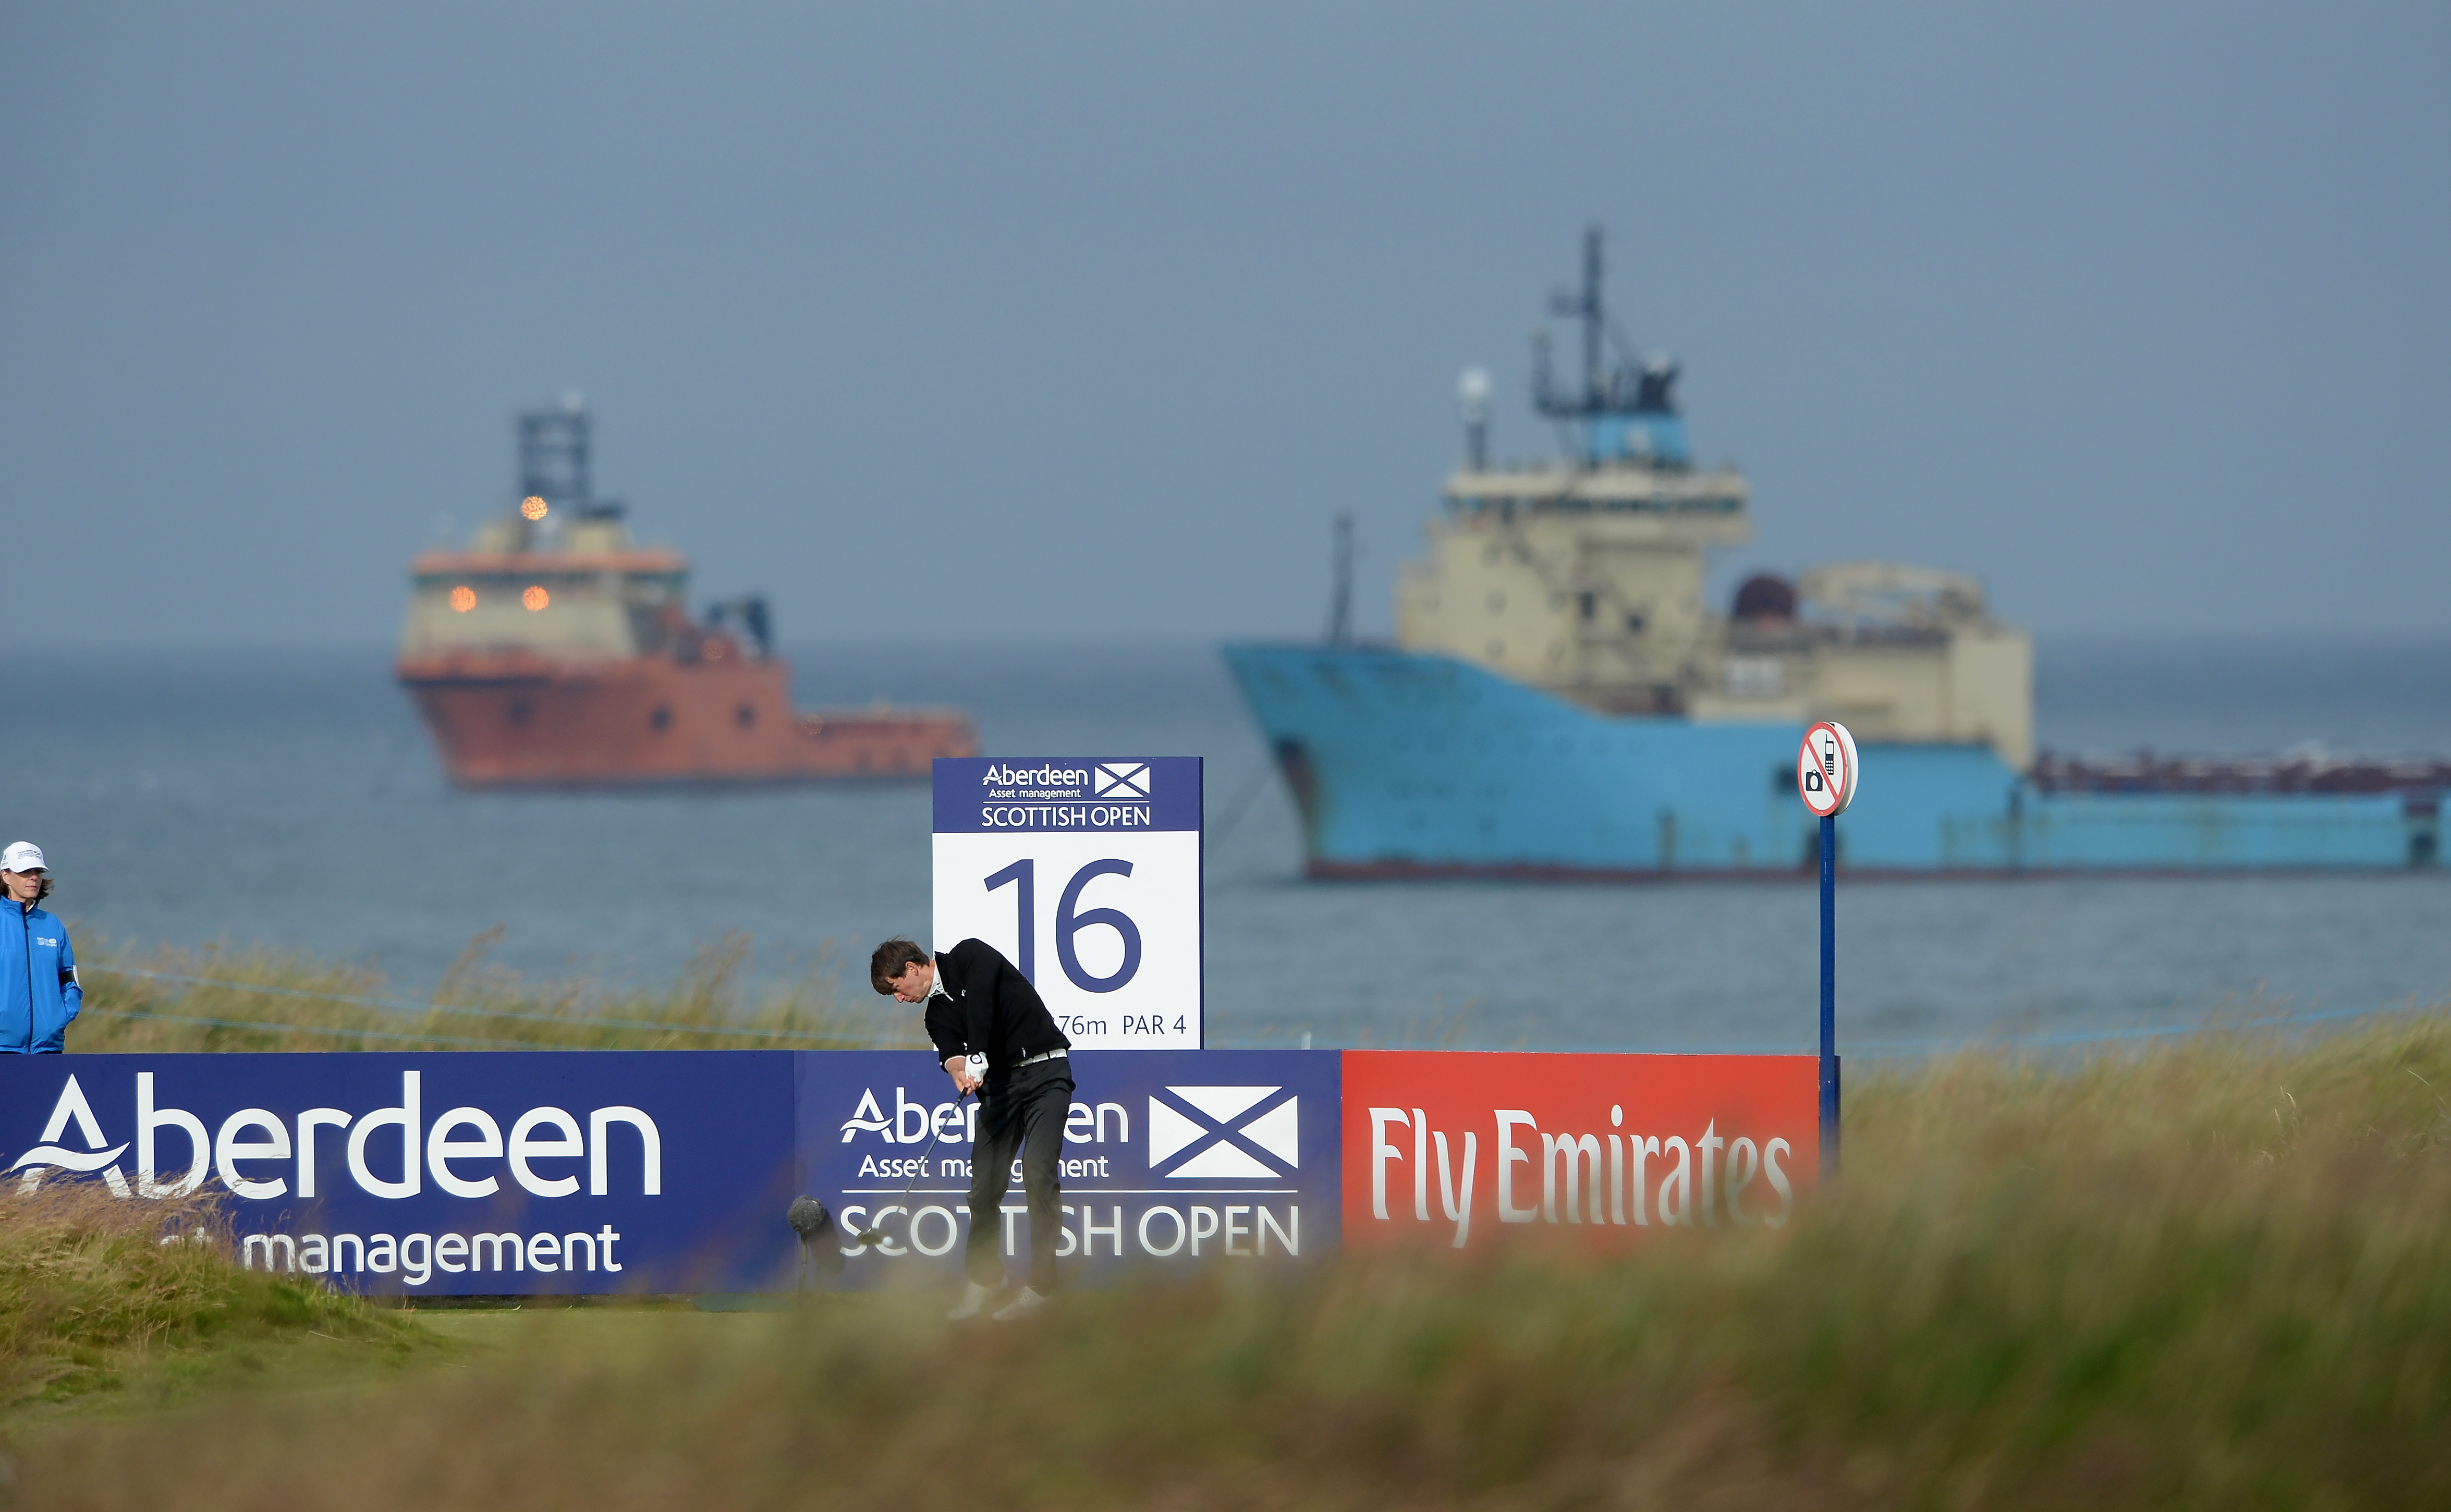 Royal Aberdeen votes to allow women to join its club